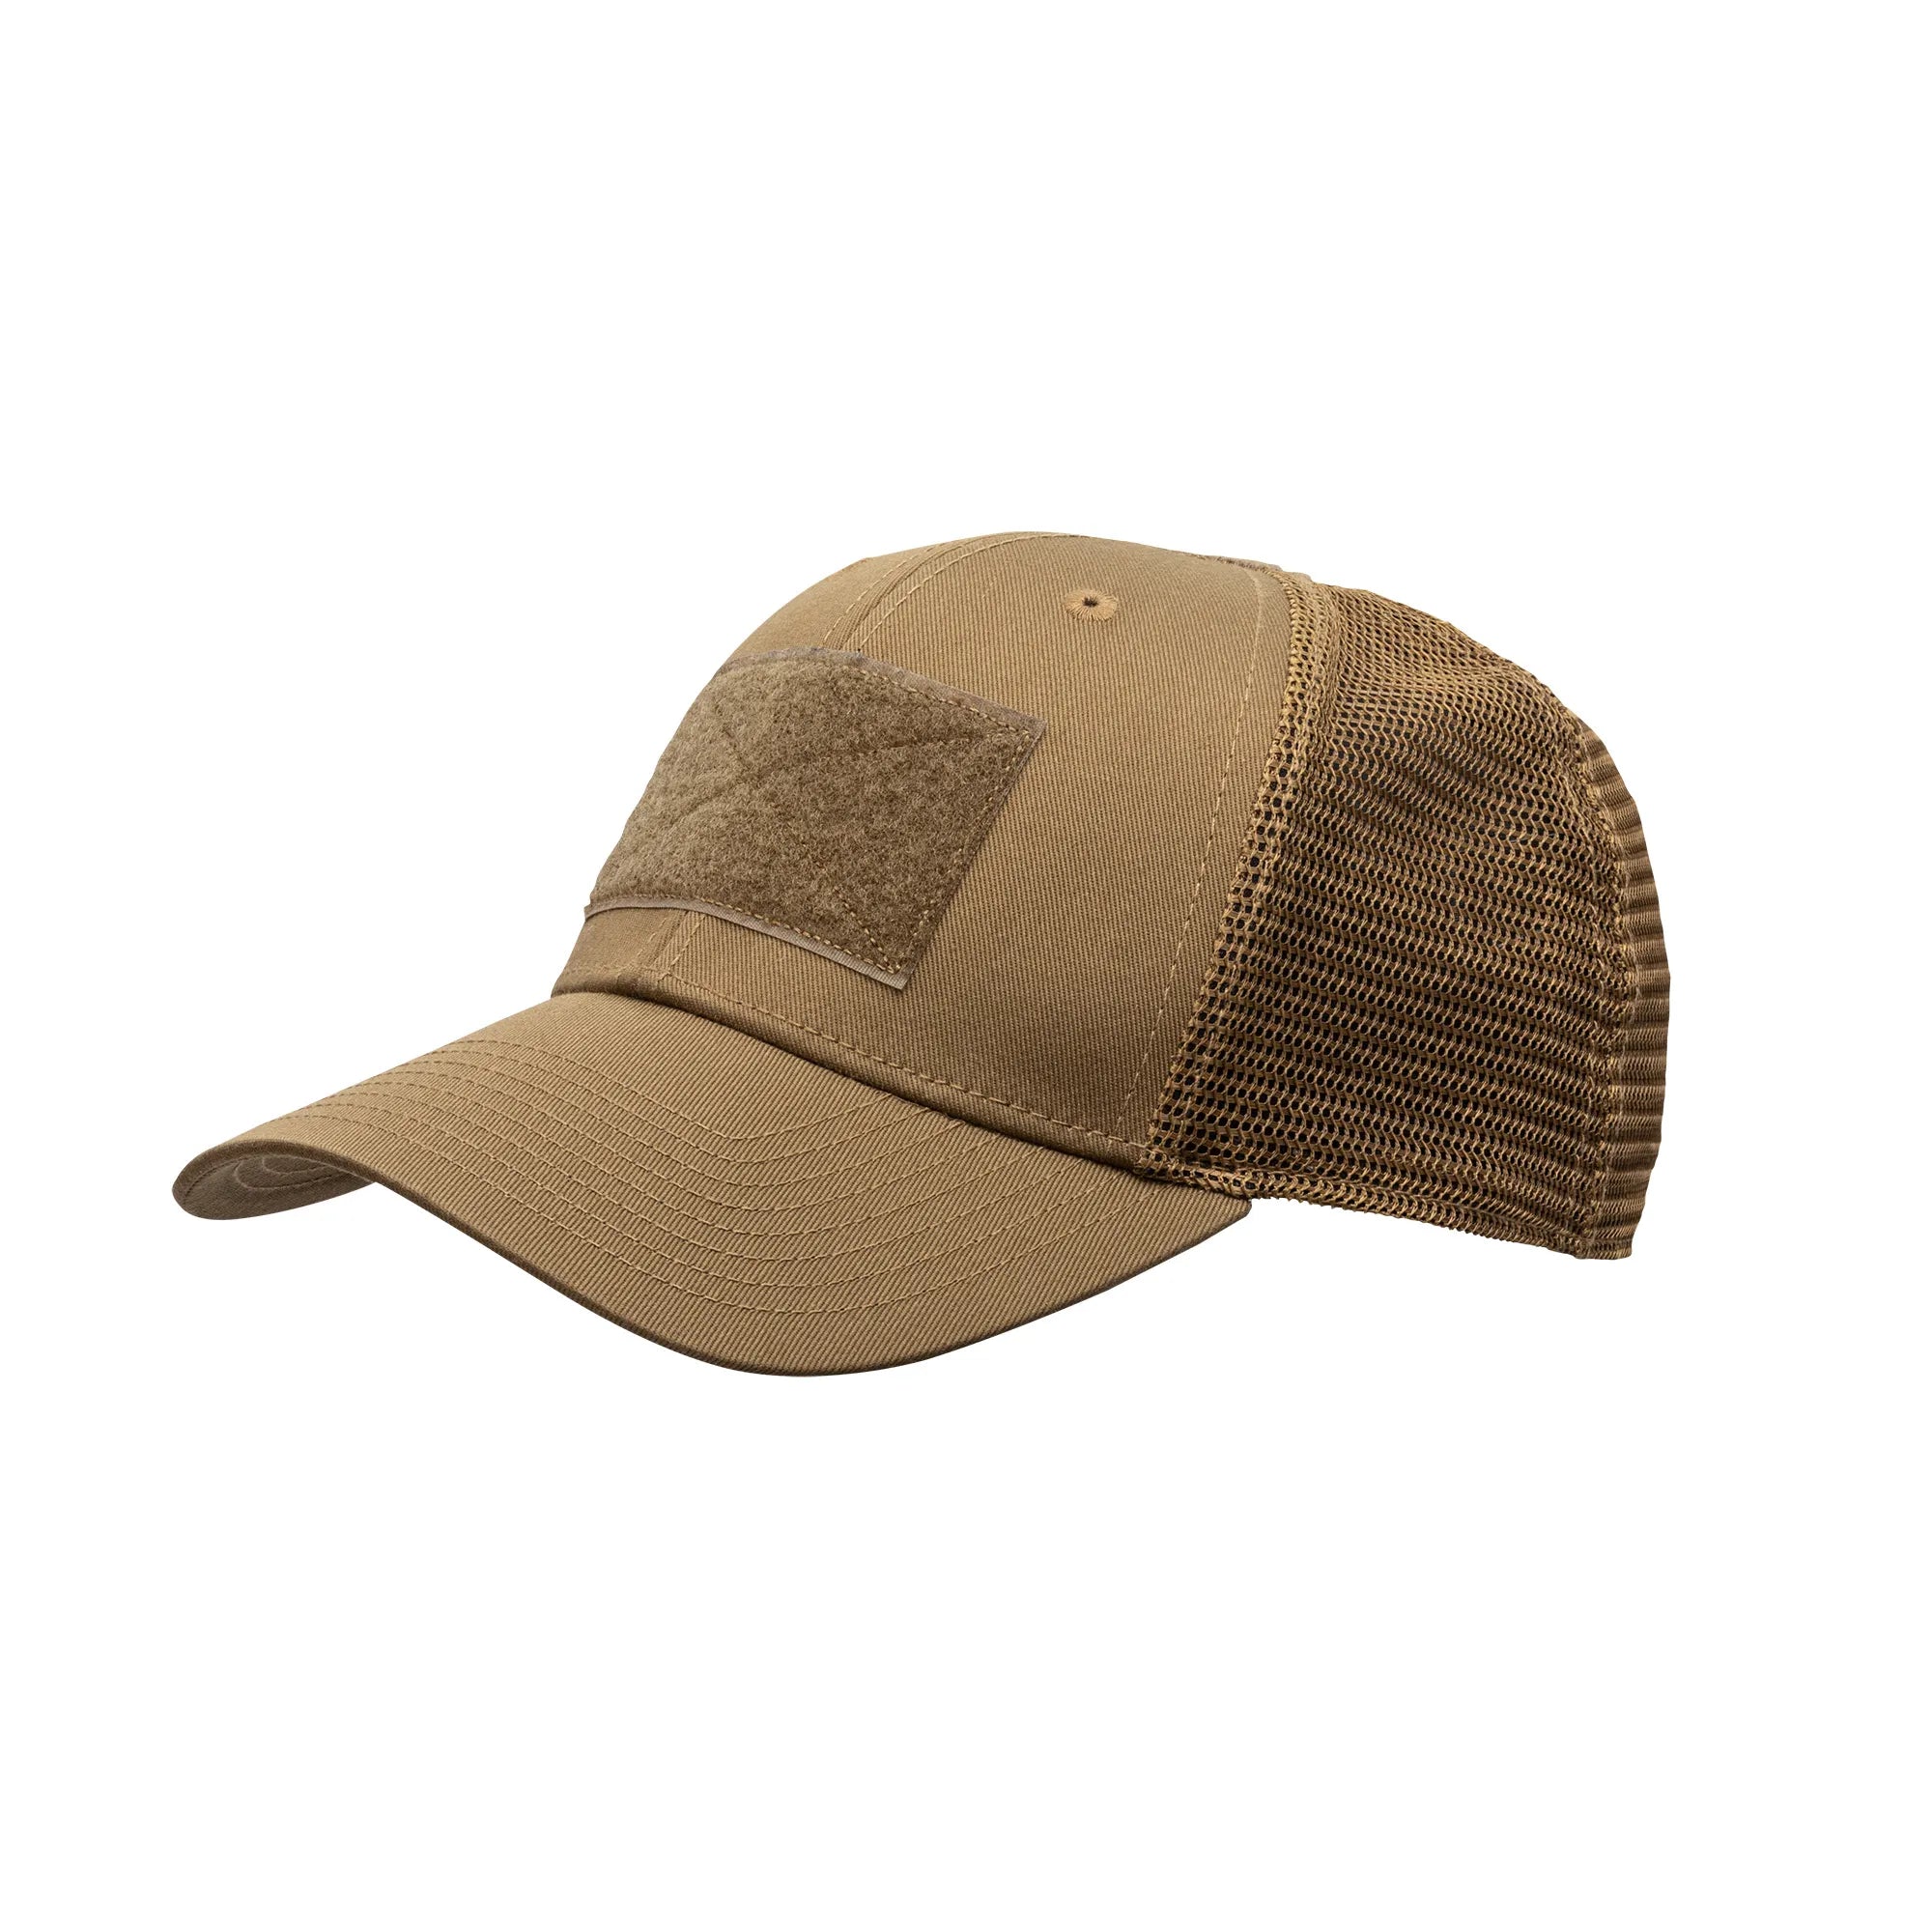 5.11 Tactical Trucker Caps & Free Patch